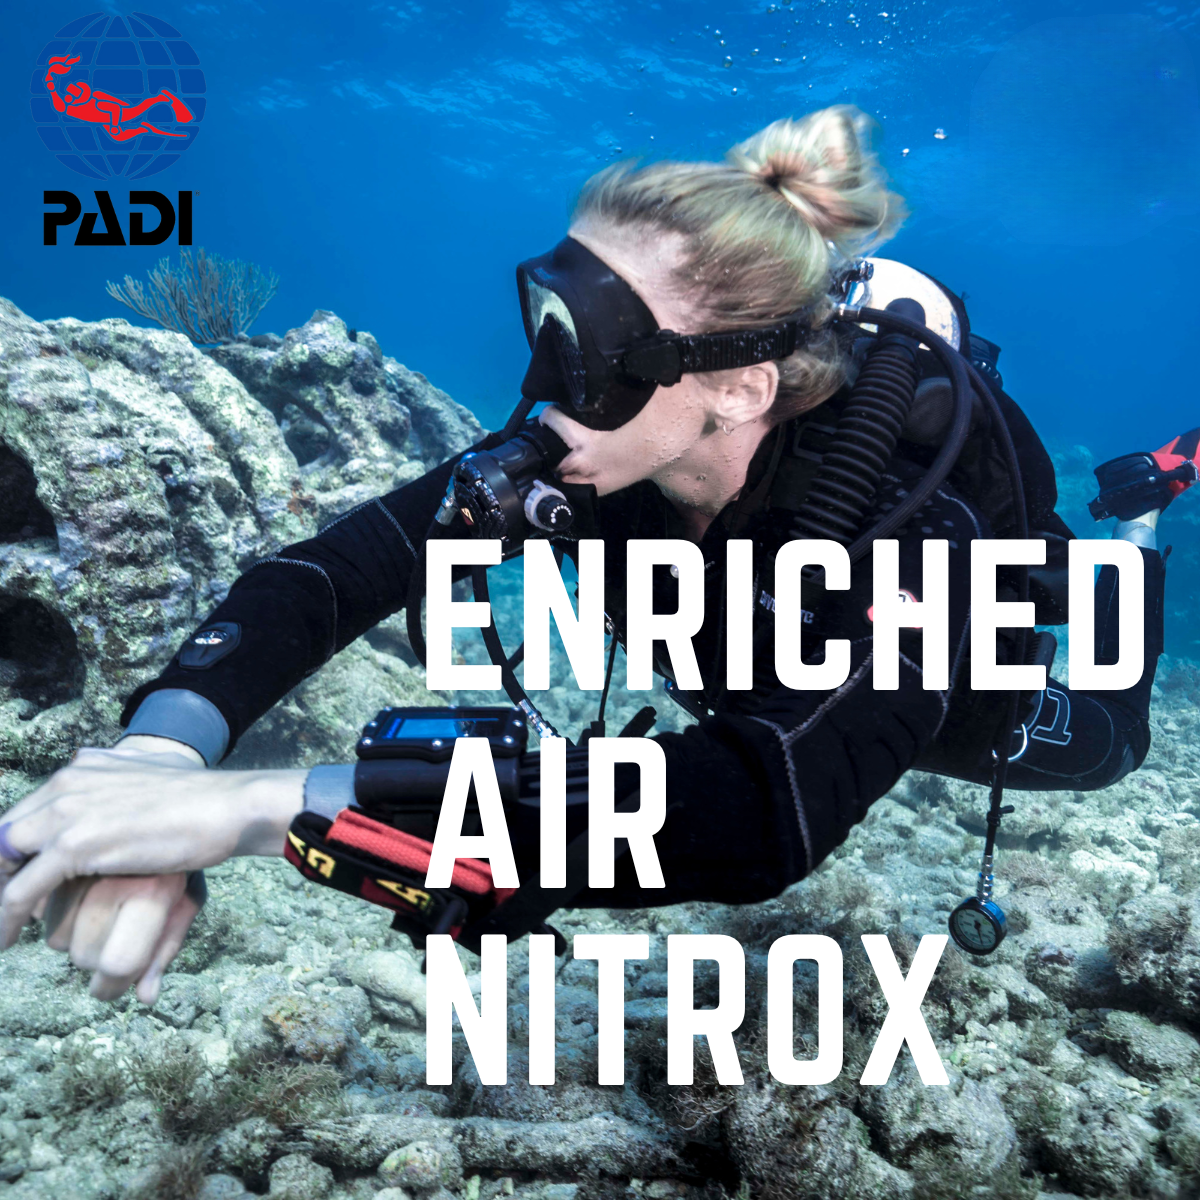 PADI ENRICHED AIR (NITROX) SPECIALITY